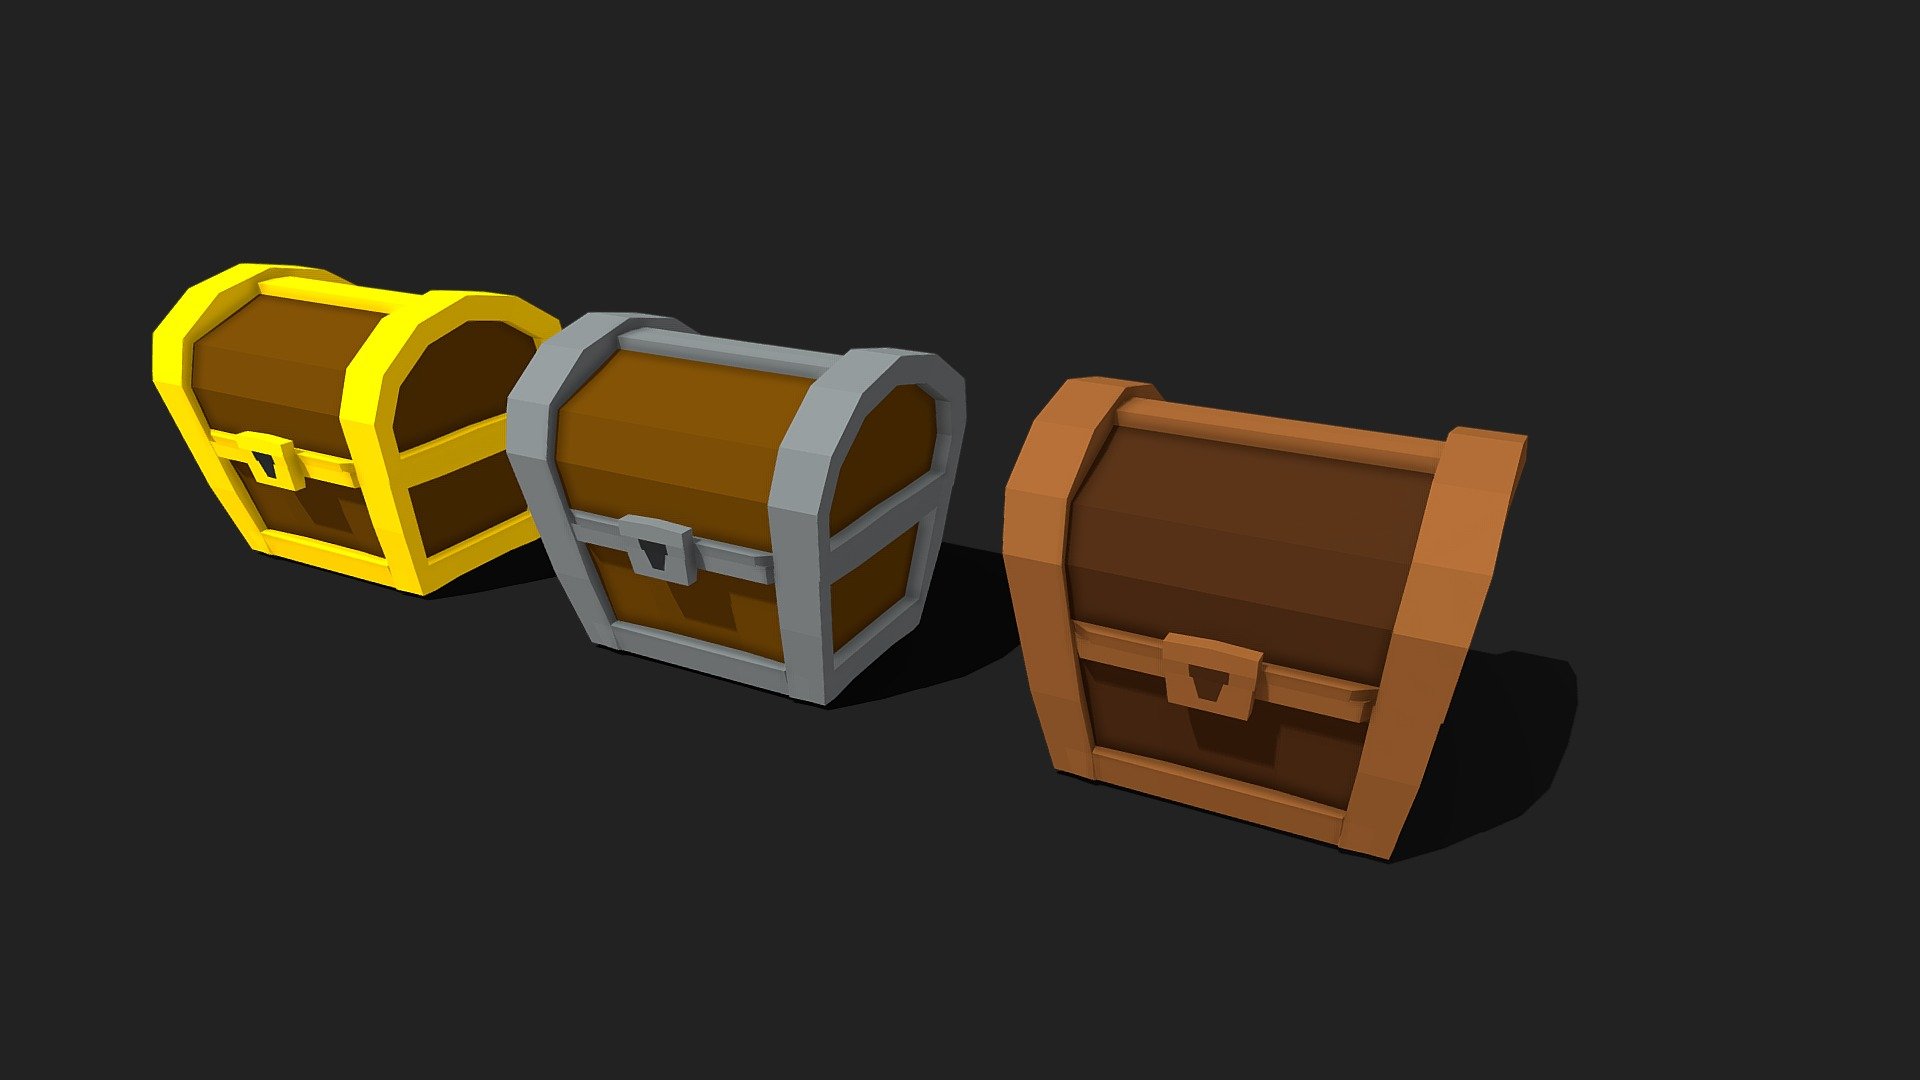 A  Low poly cartoon animated Chest Kit

You can find more free content Here

If you create adventure or rpg games like me consider checking out the pack below

Modular Cartoon Dungeon Props and Tileset Pack

If you wanna know my works with gamedev check out this link  Here

For Donations - Free Animated Low Poly Cartoon Chest Kit - Download Free 3D model by Overaction Game Studio (@overactiongamestudio) 3d model